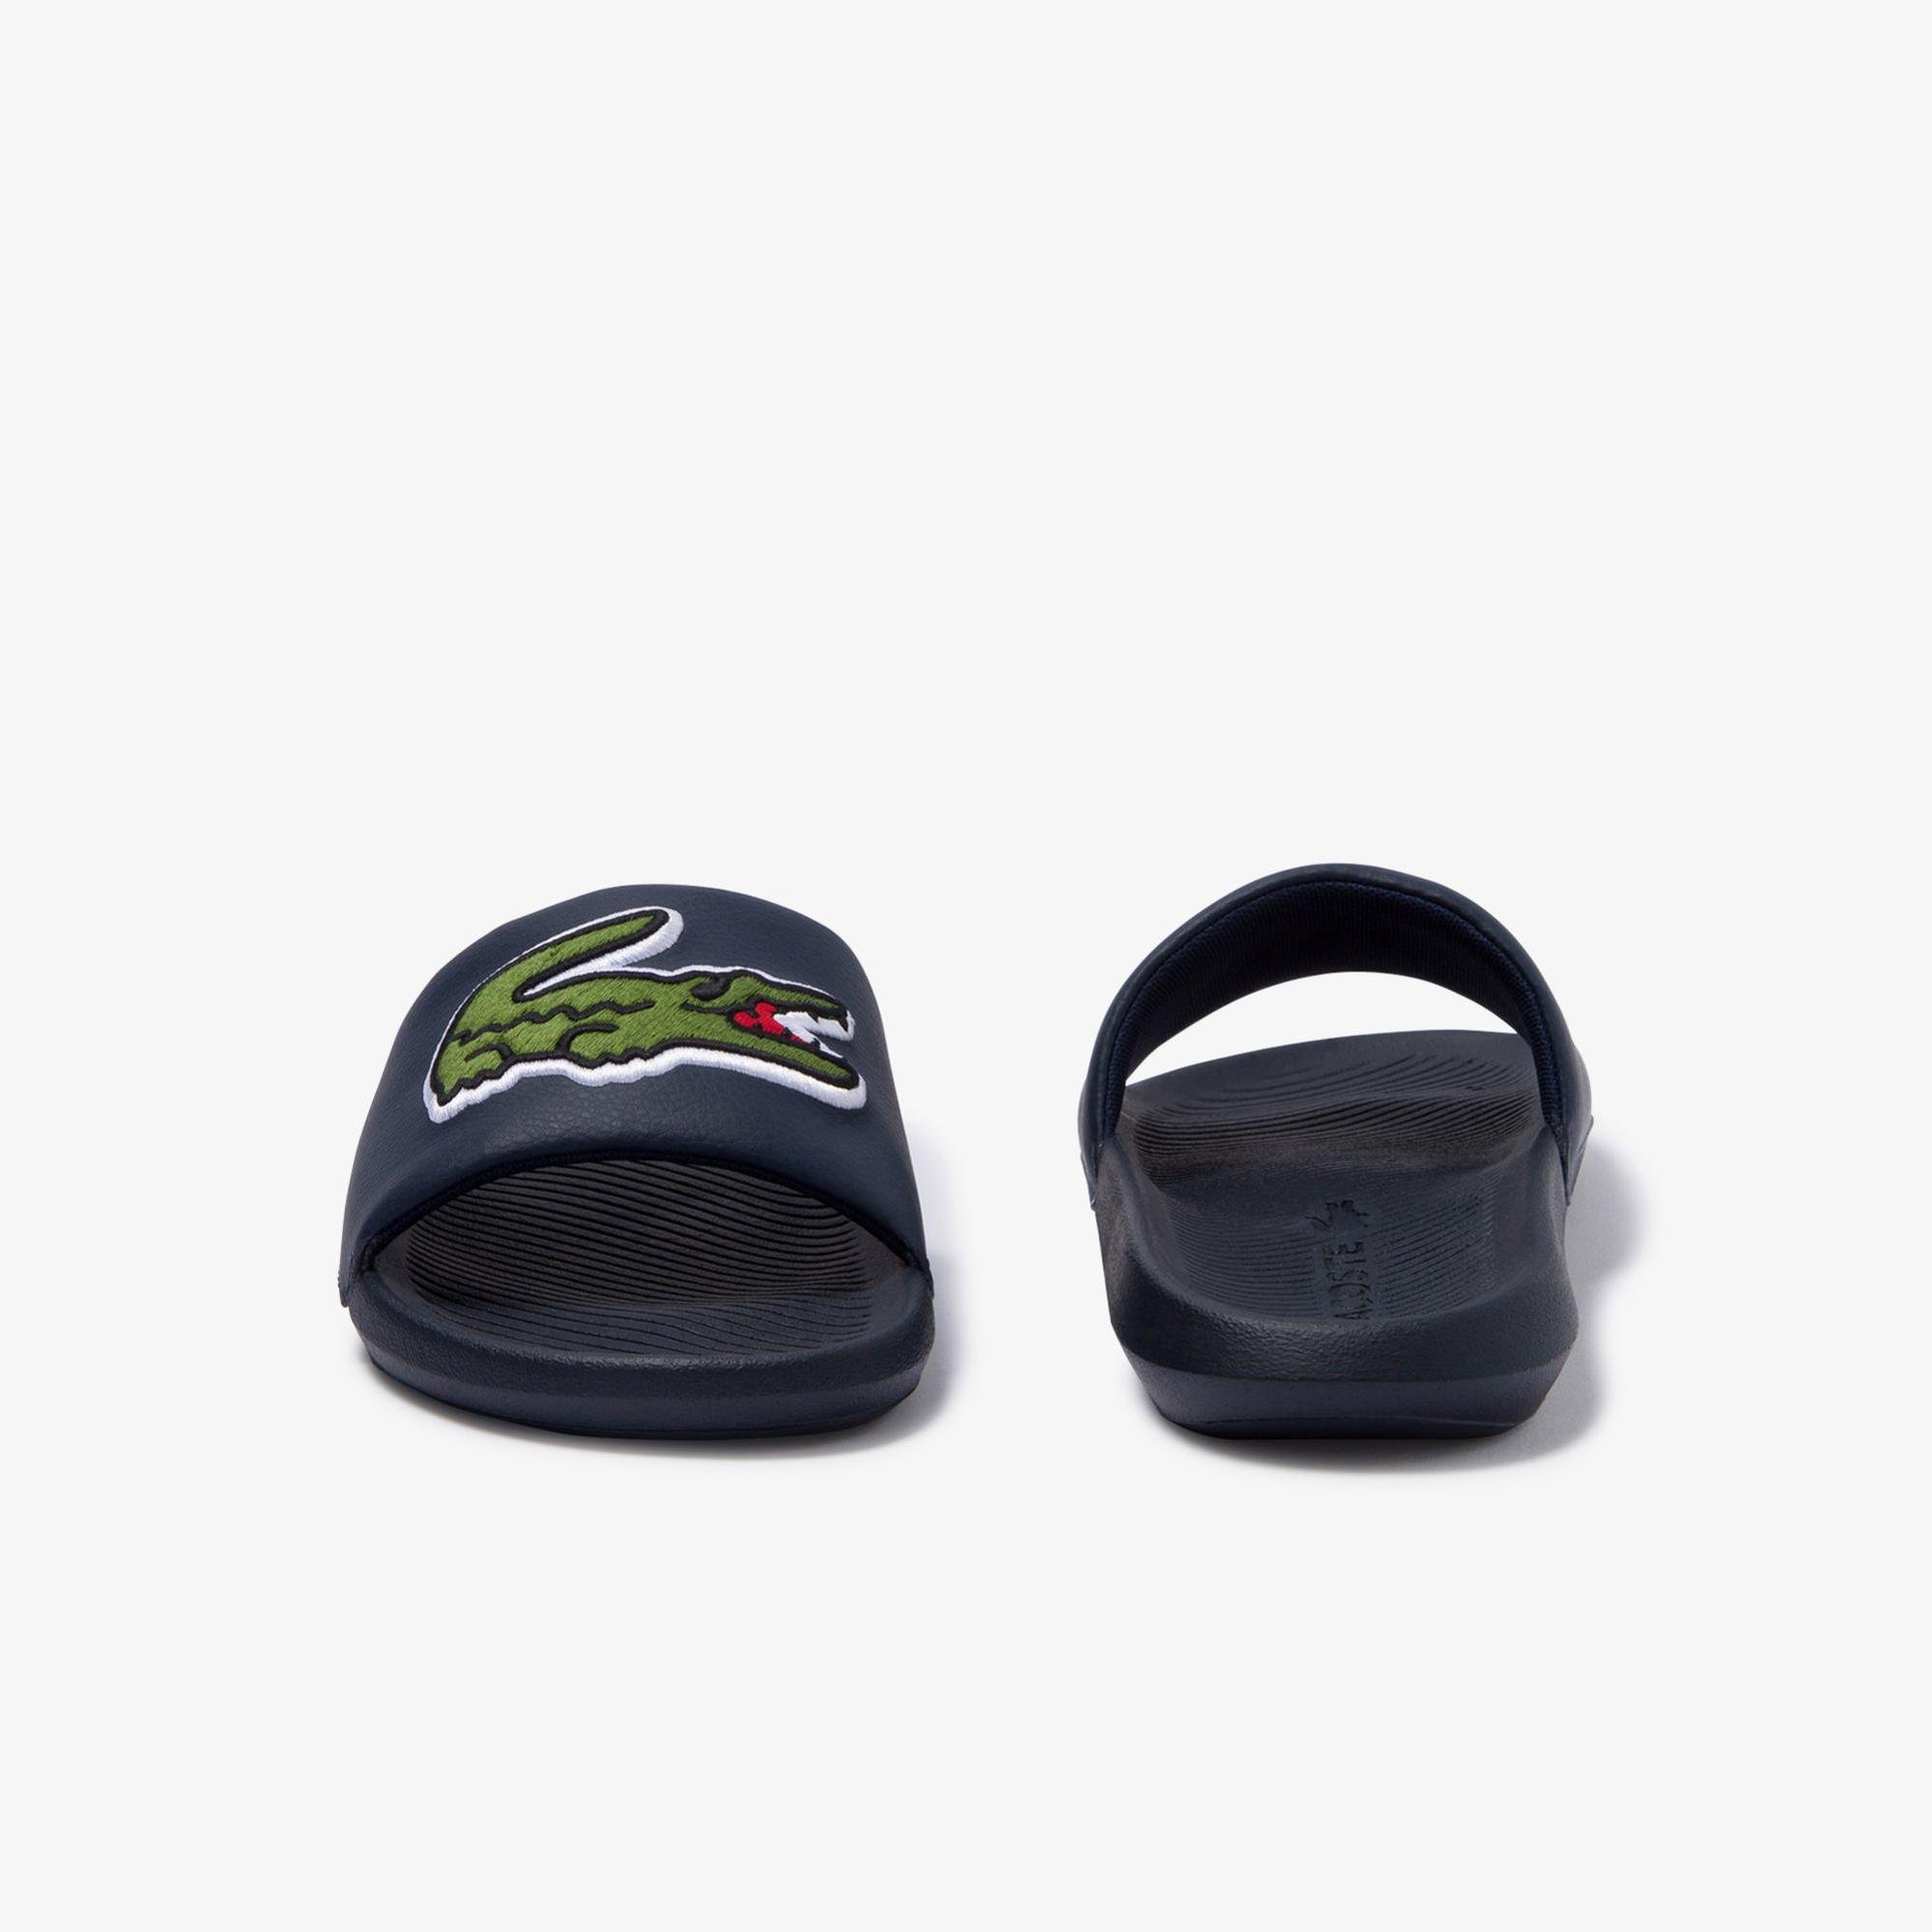 Lacoste Men's Croco Synthetic and PU Slides